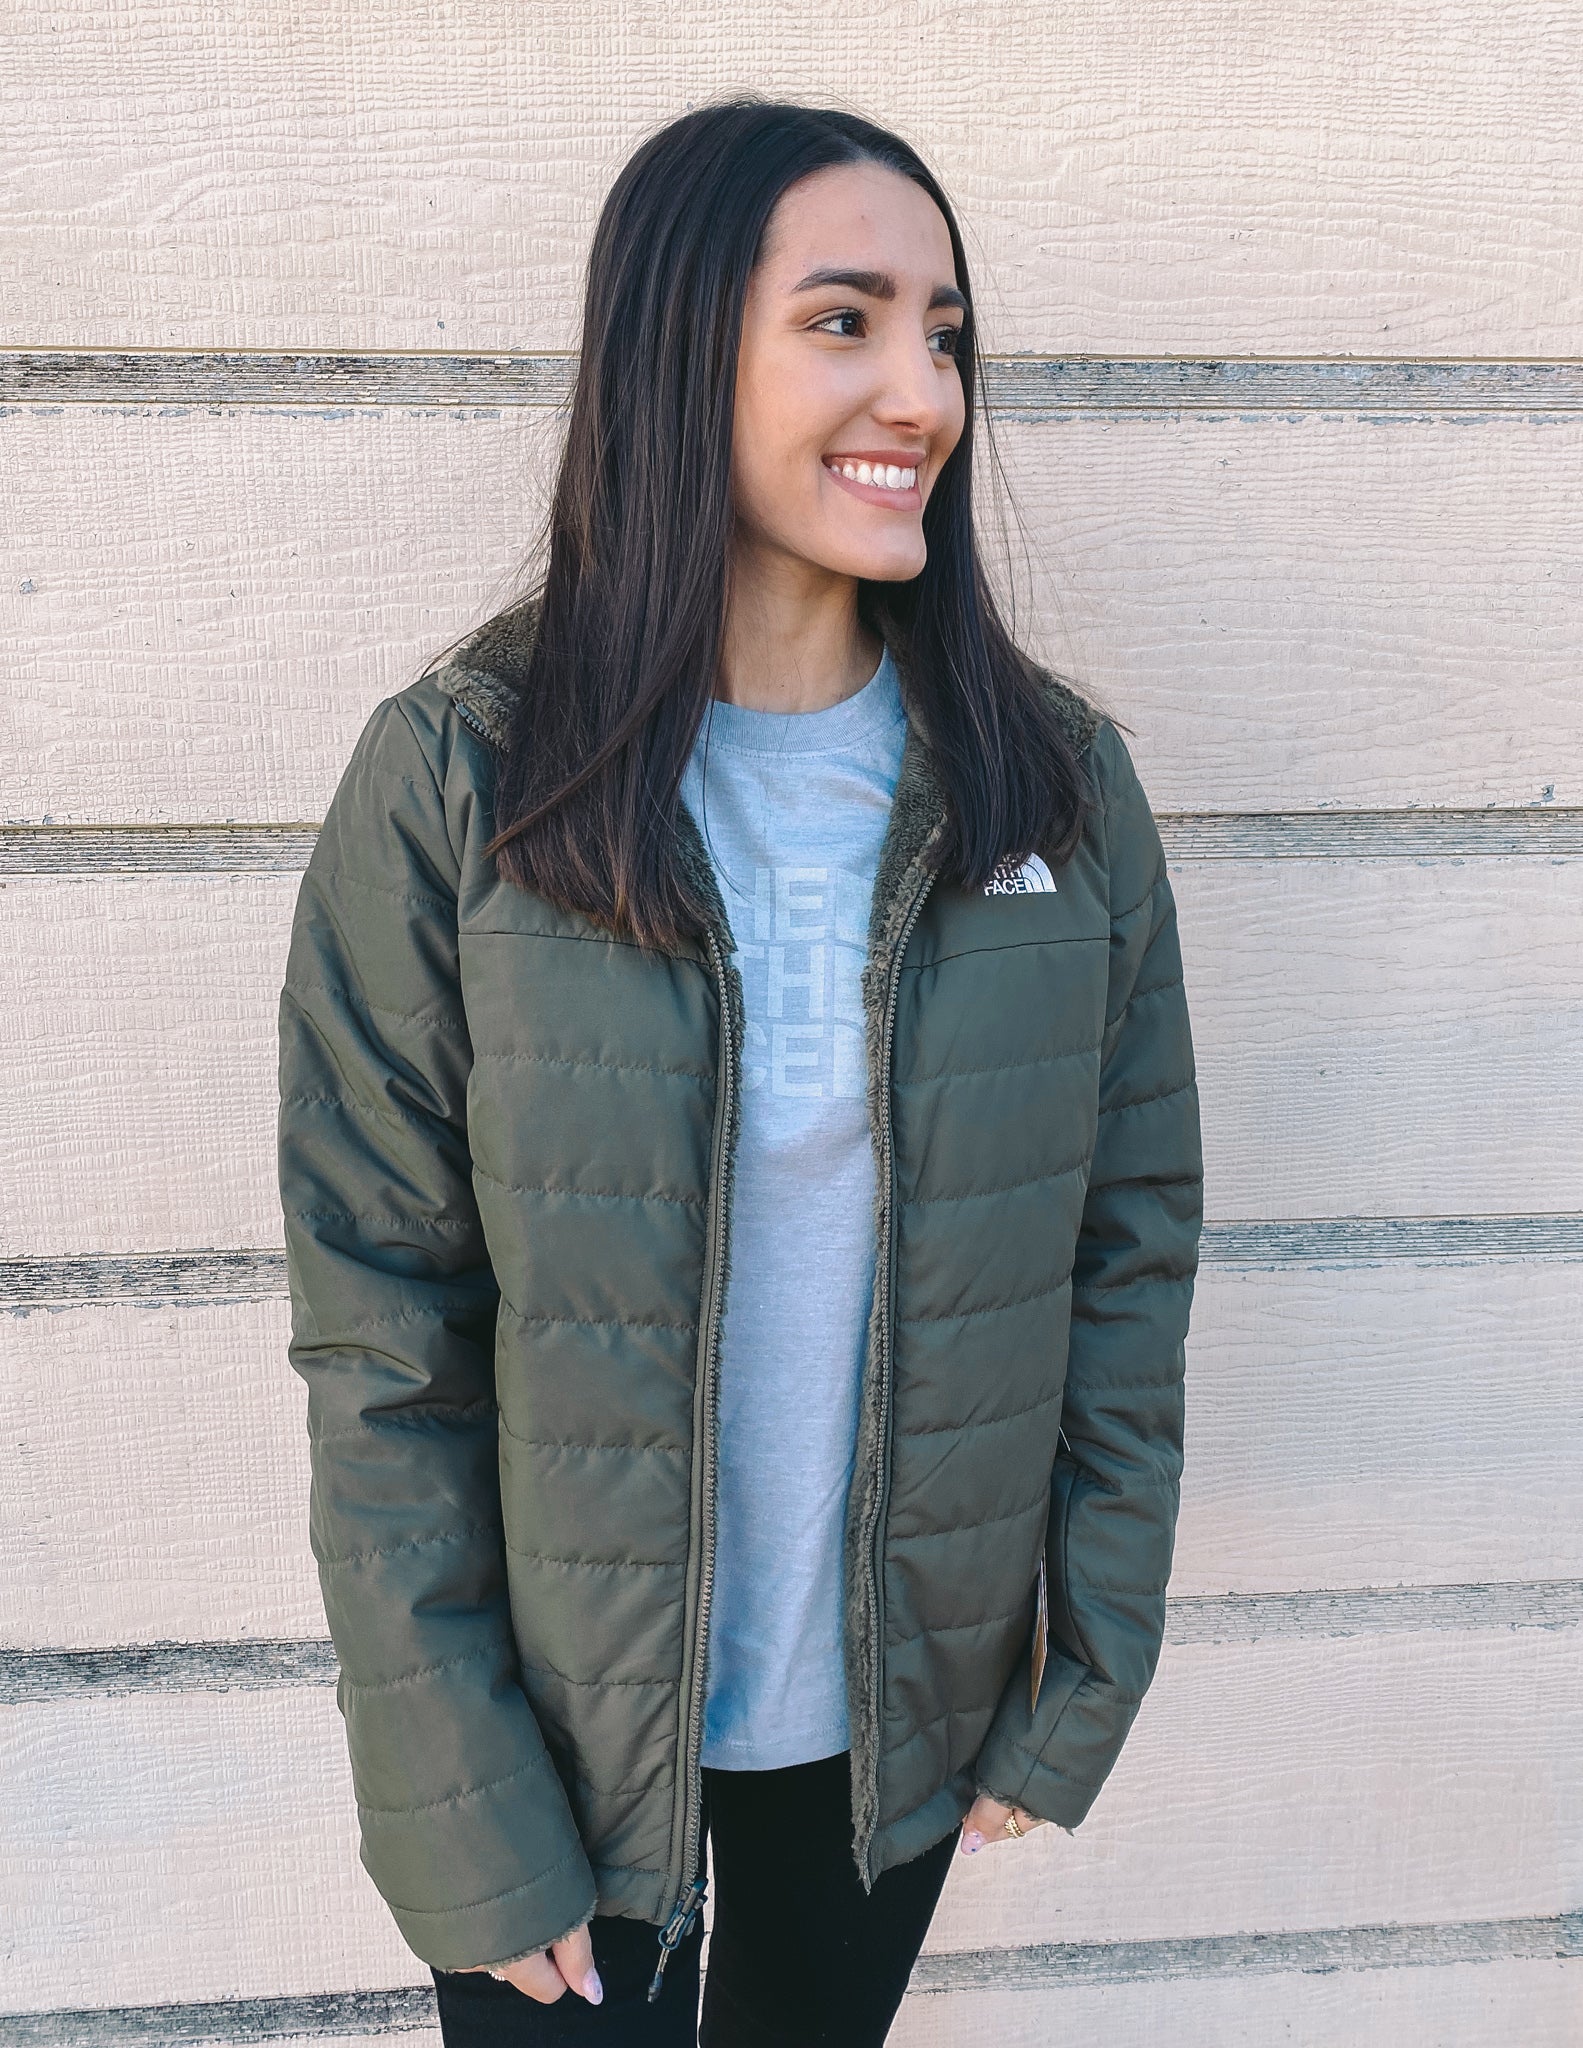 Women's Mossbud Insulated Reversible Jacket - The Benchmark